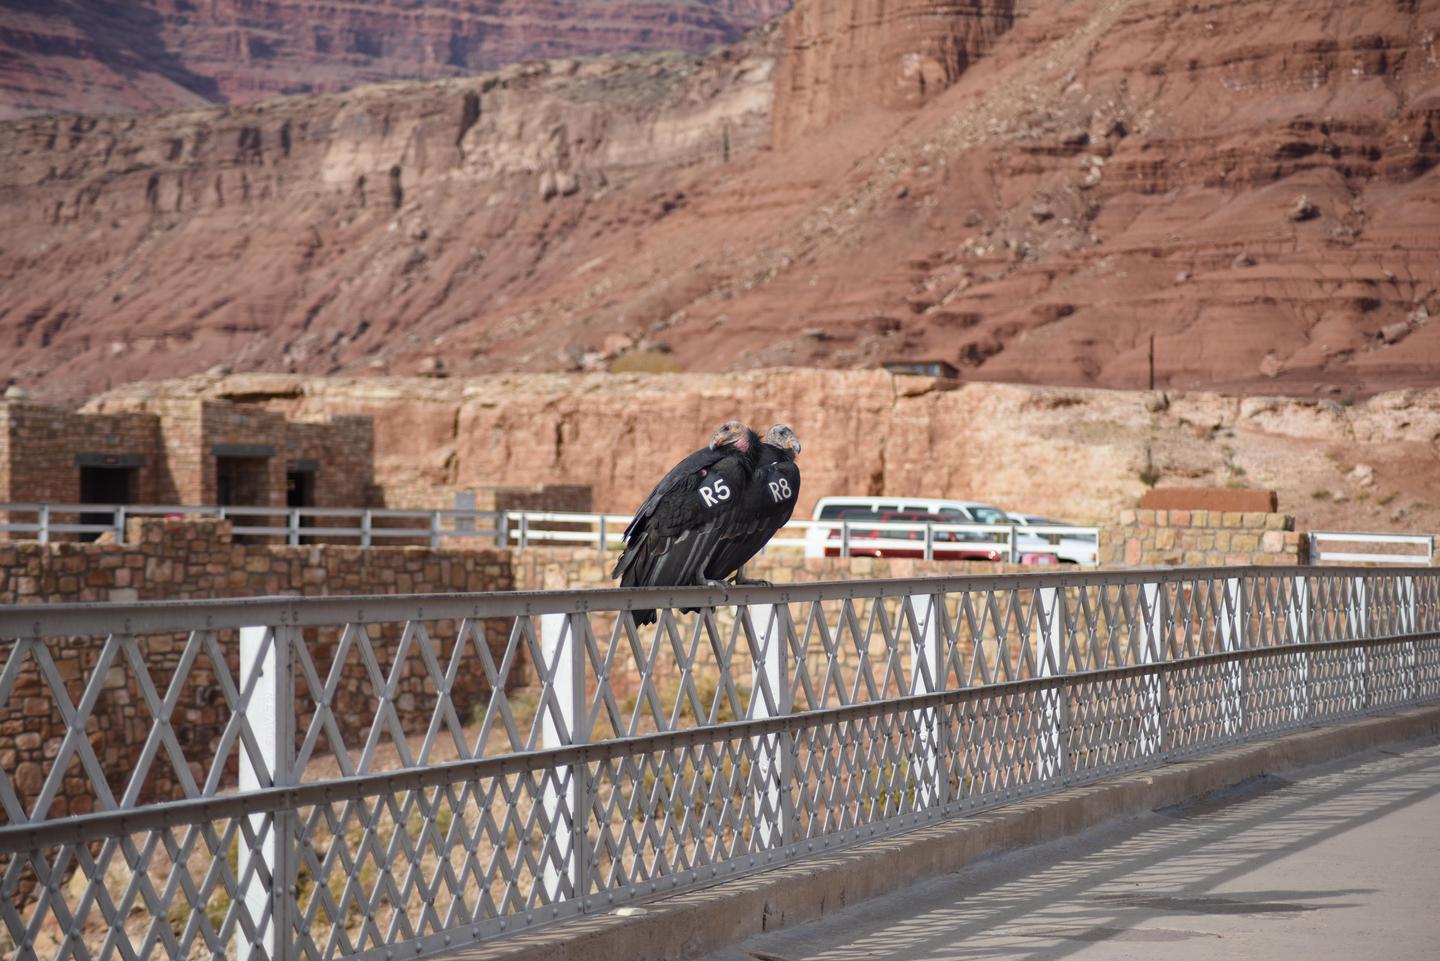 Candors on the historic Navajo BridgeYou never know who you might meet on your walk across the historic Navajo Bridge.